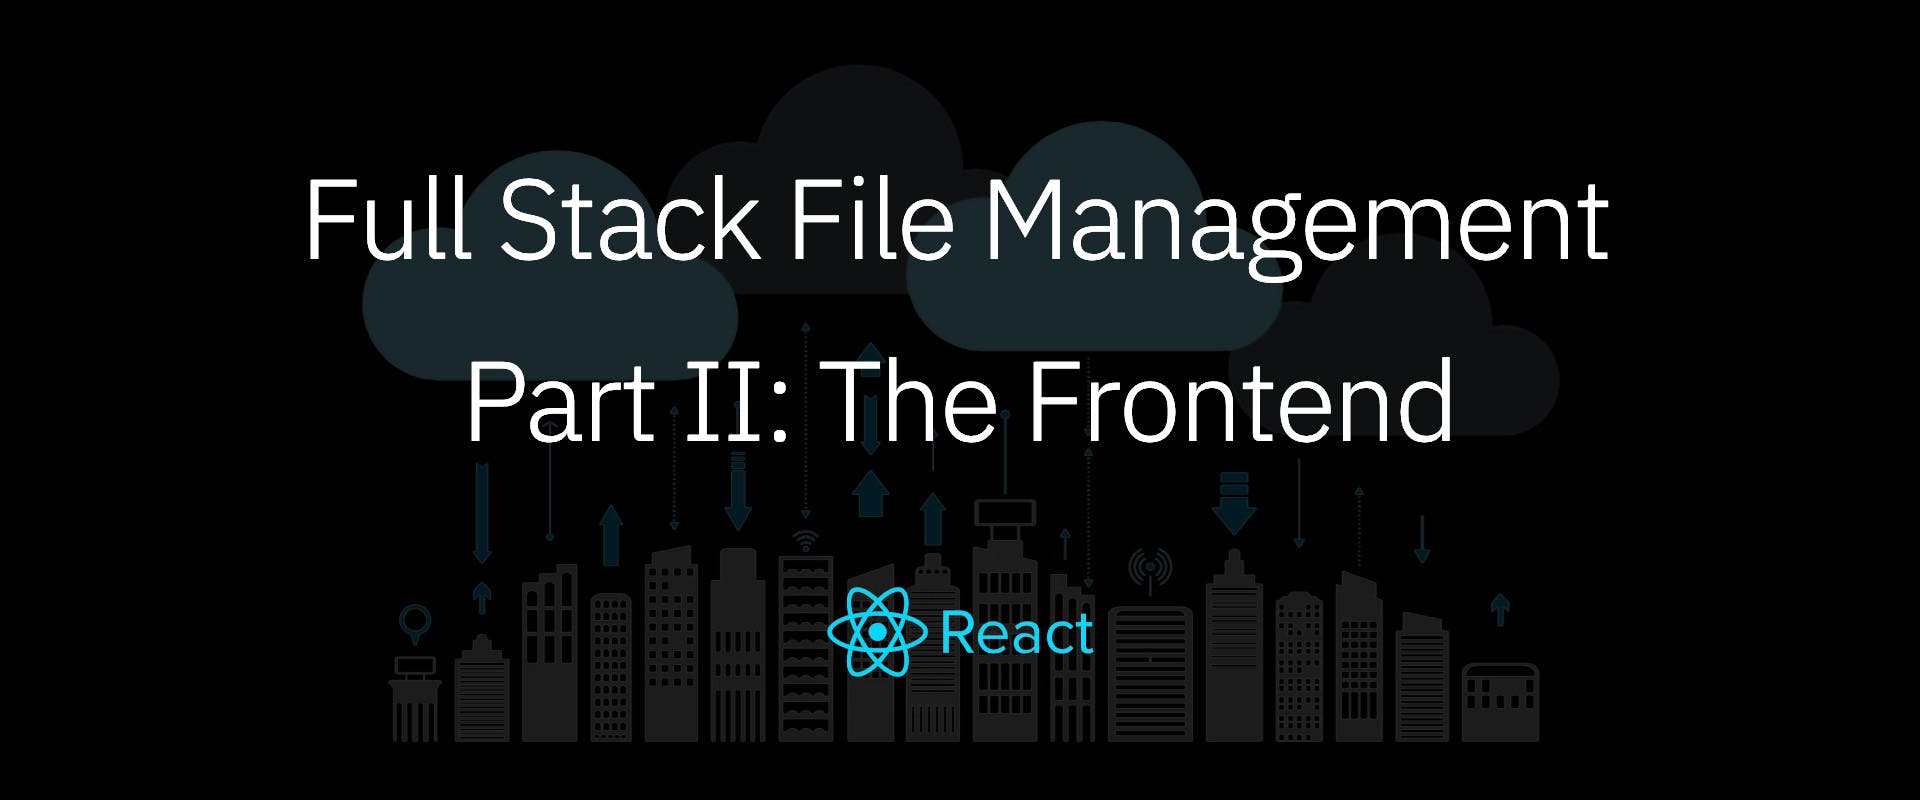 Full Stack File Management Part II: The Frontend